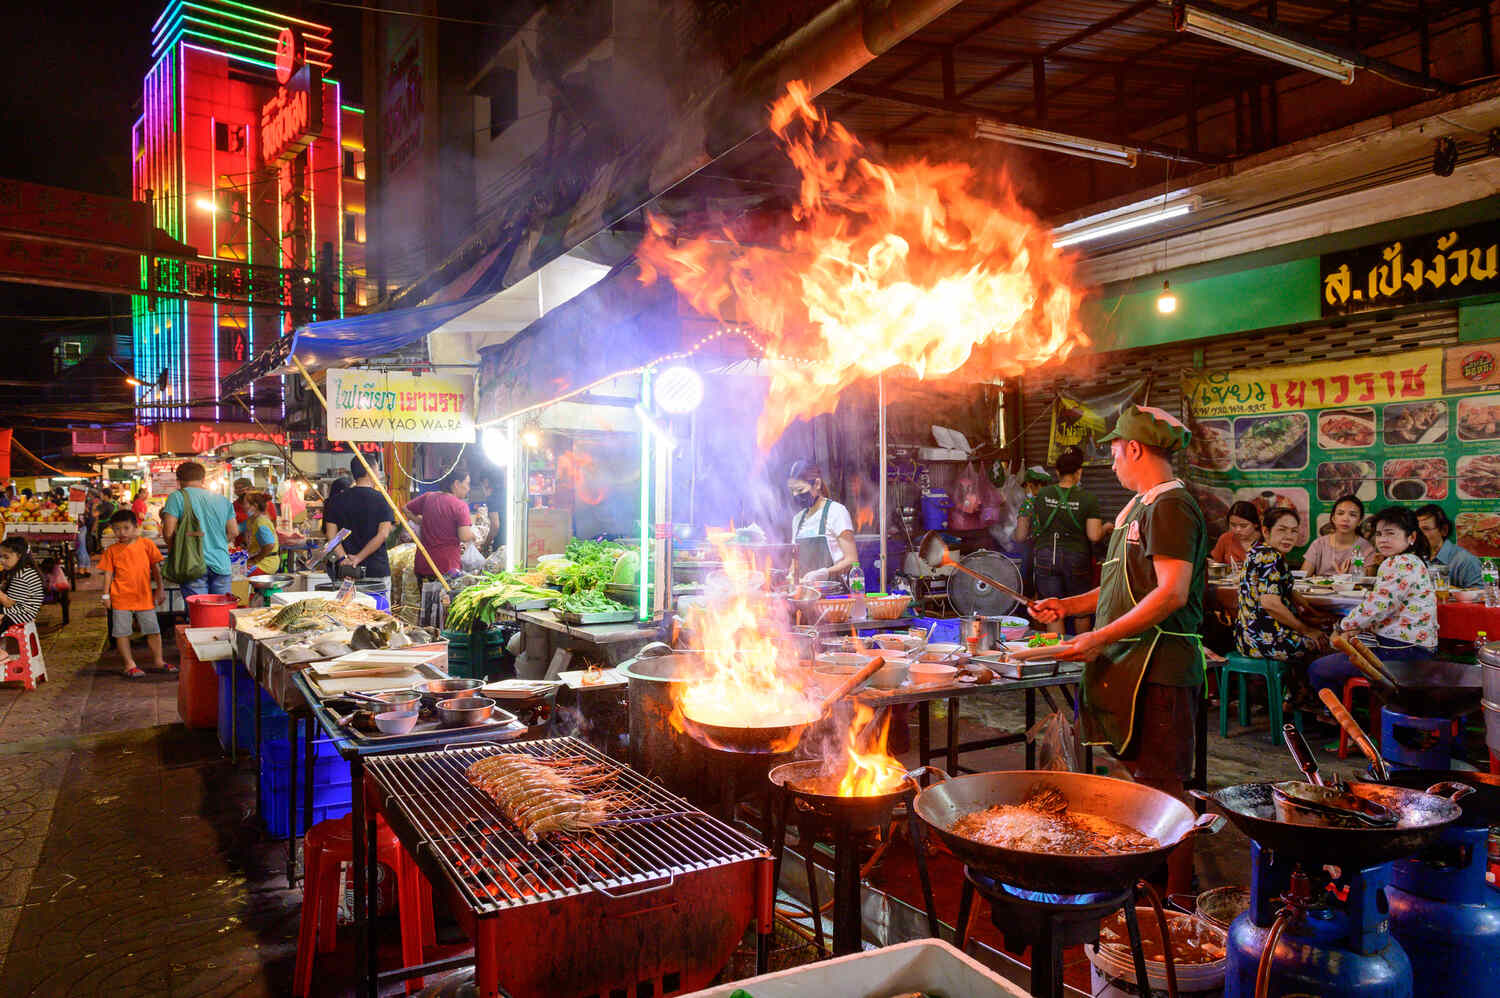 A vibrant food stall with a large flame coming from a wok, cooked by a vendor at a night market.